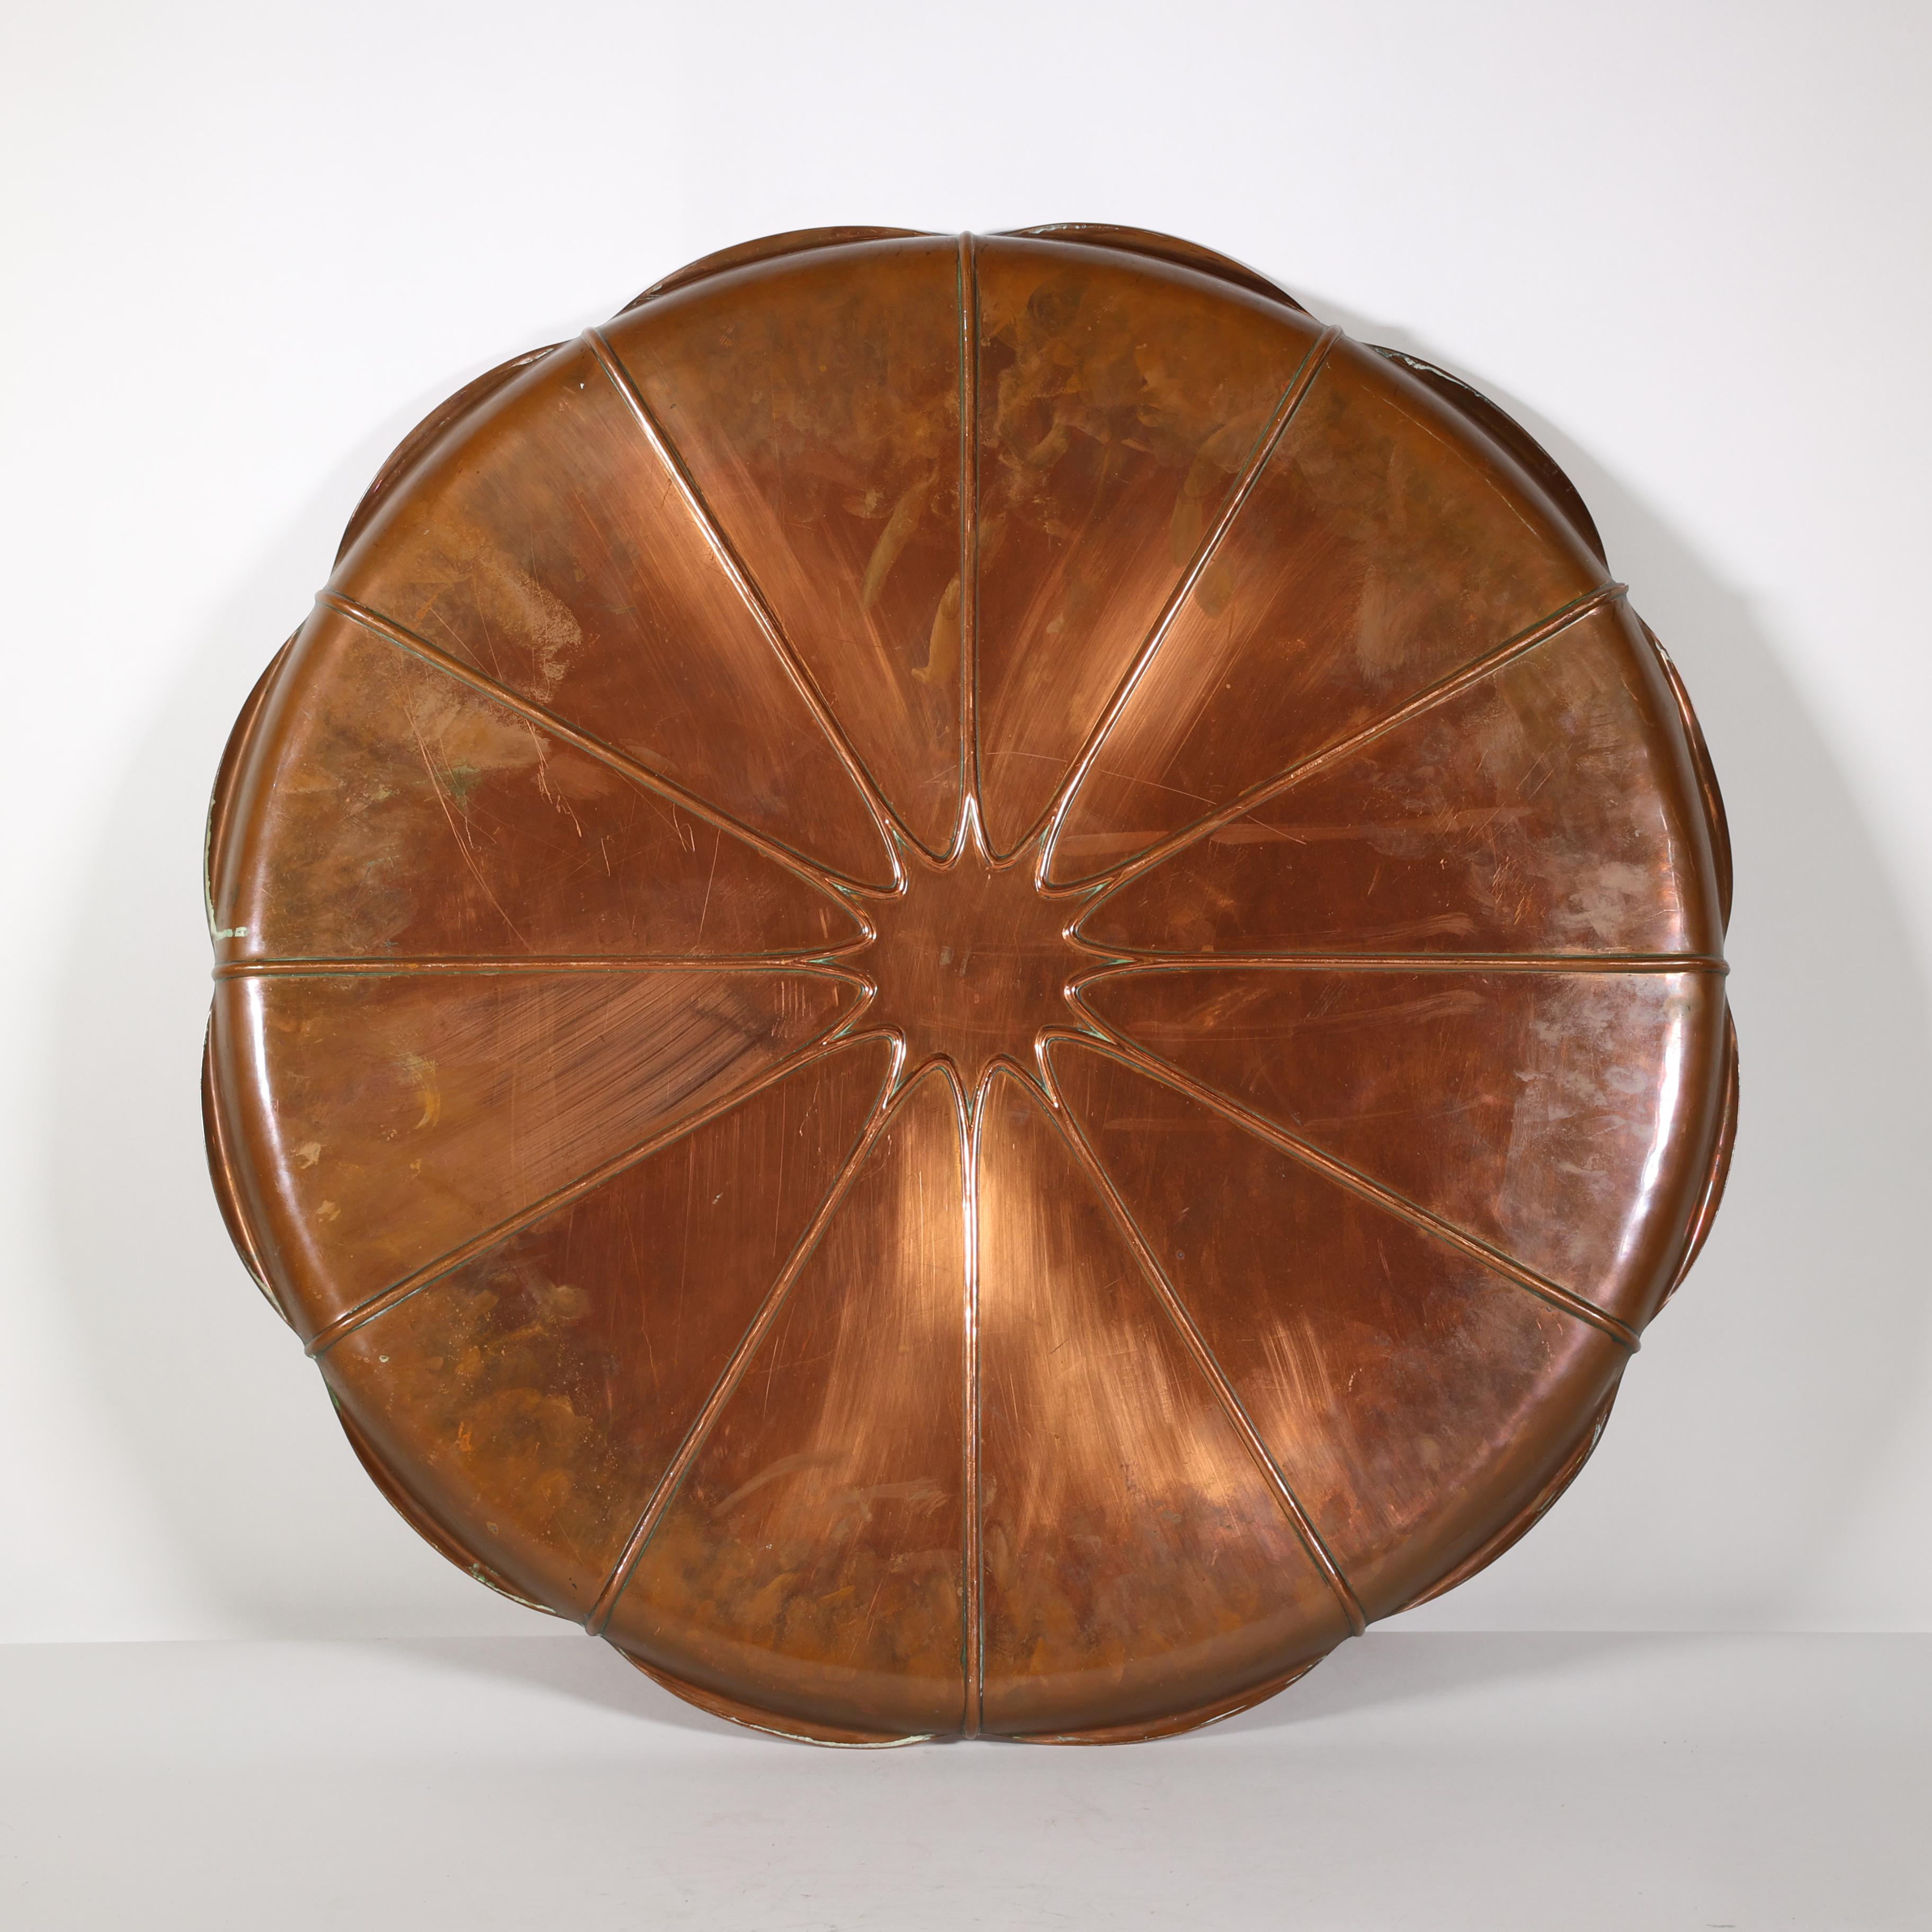 WAS Benson stamped mark. A very large Arts and Crafts copper lily pad tray.
